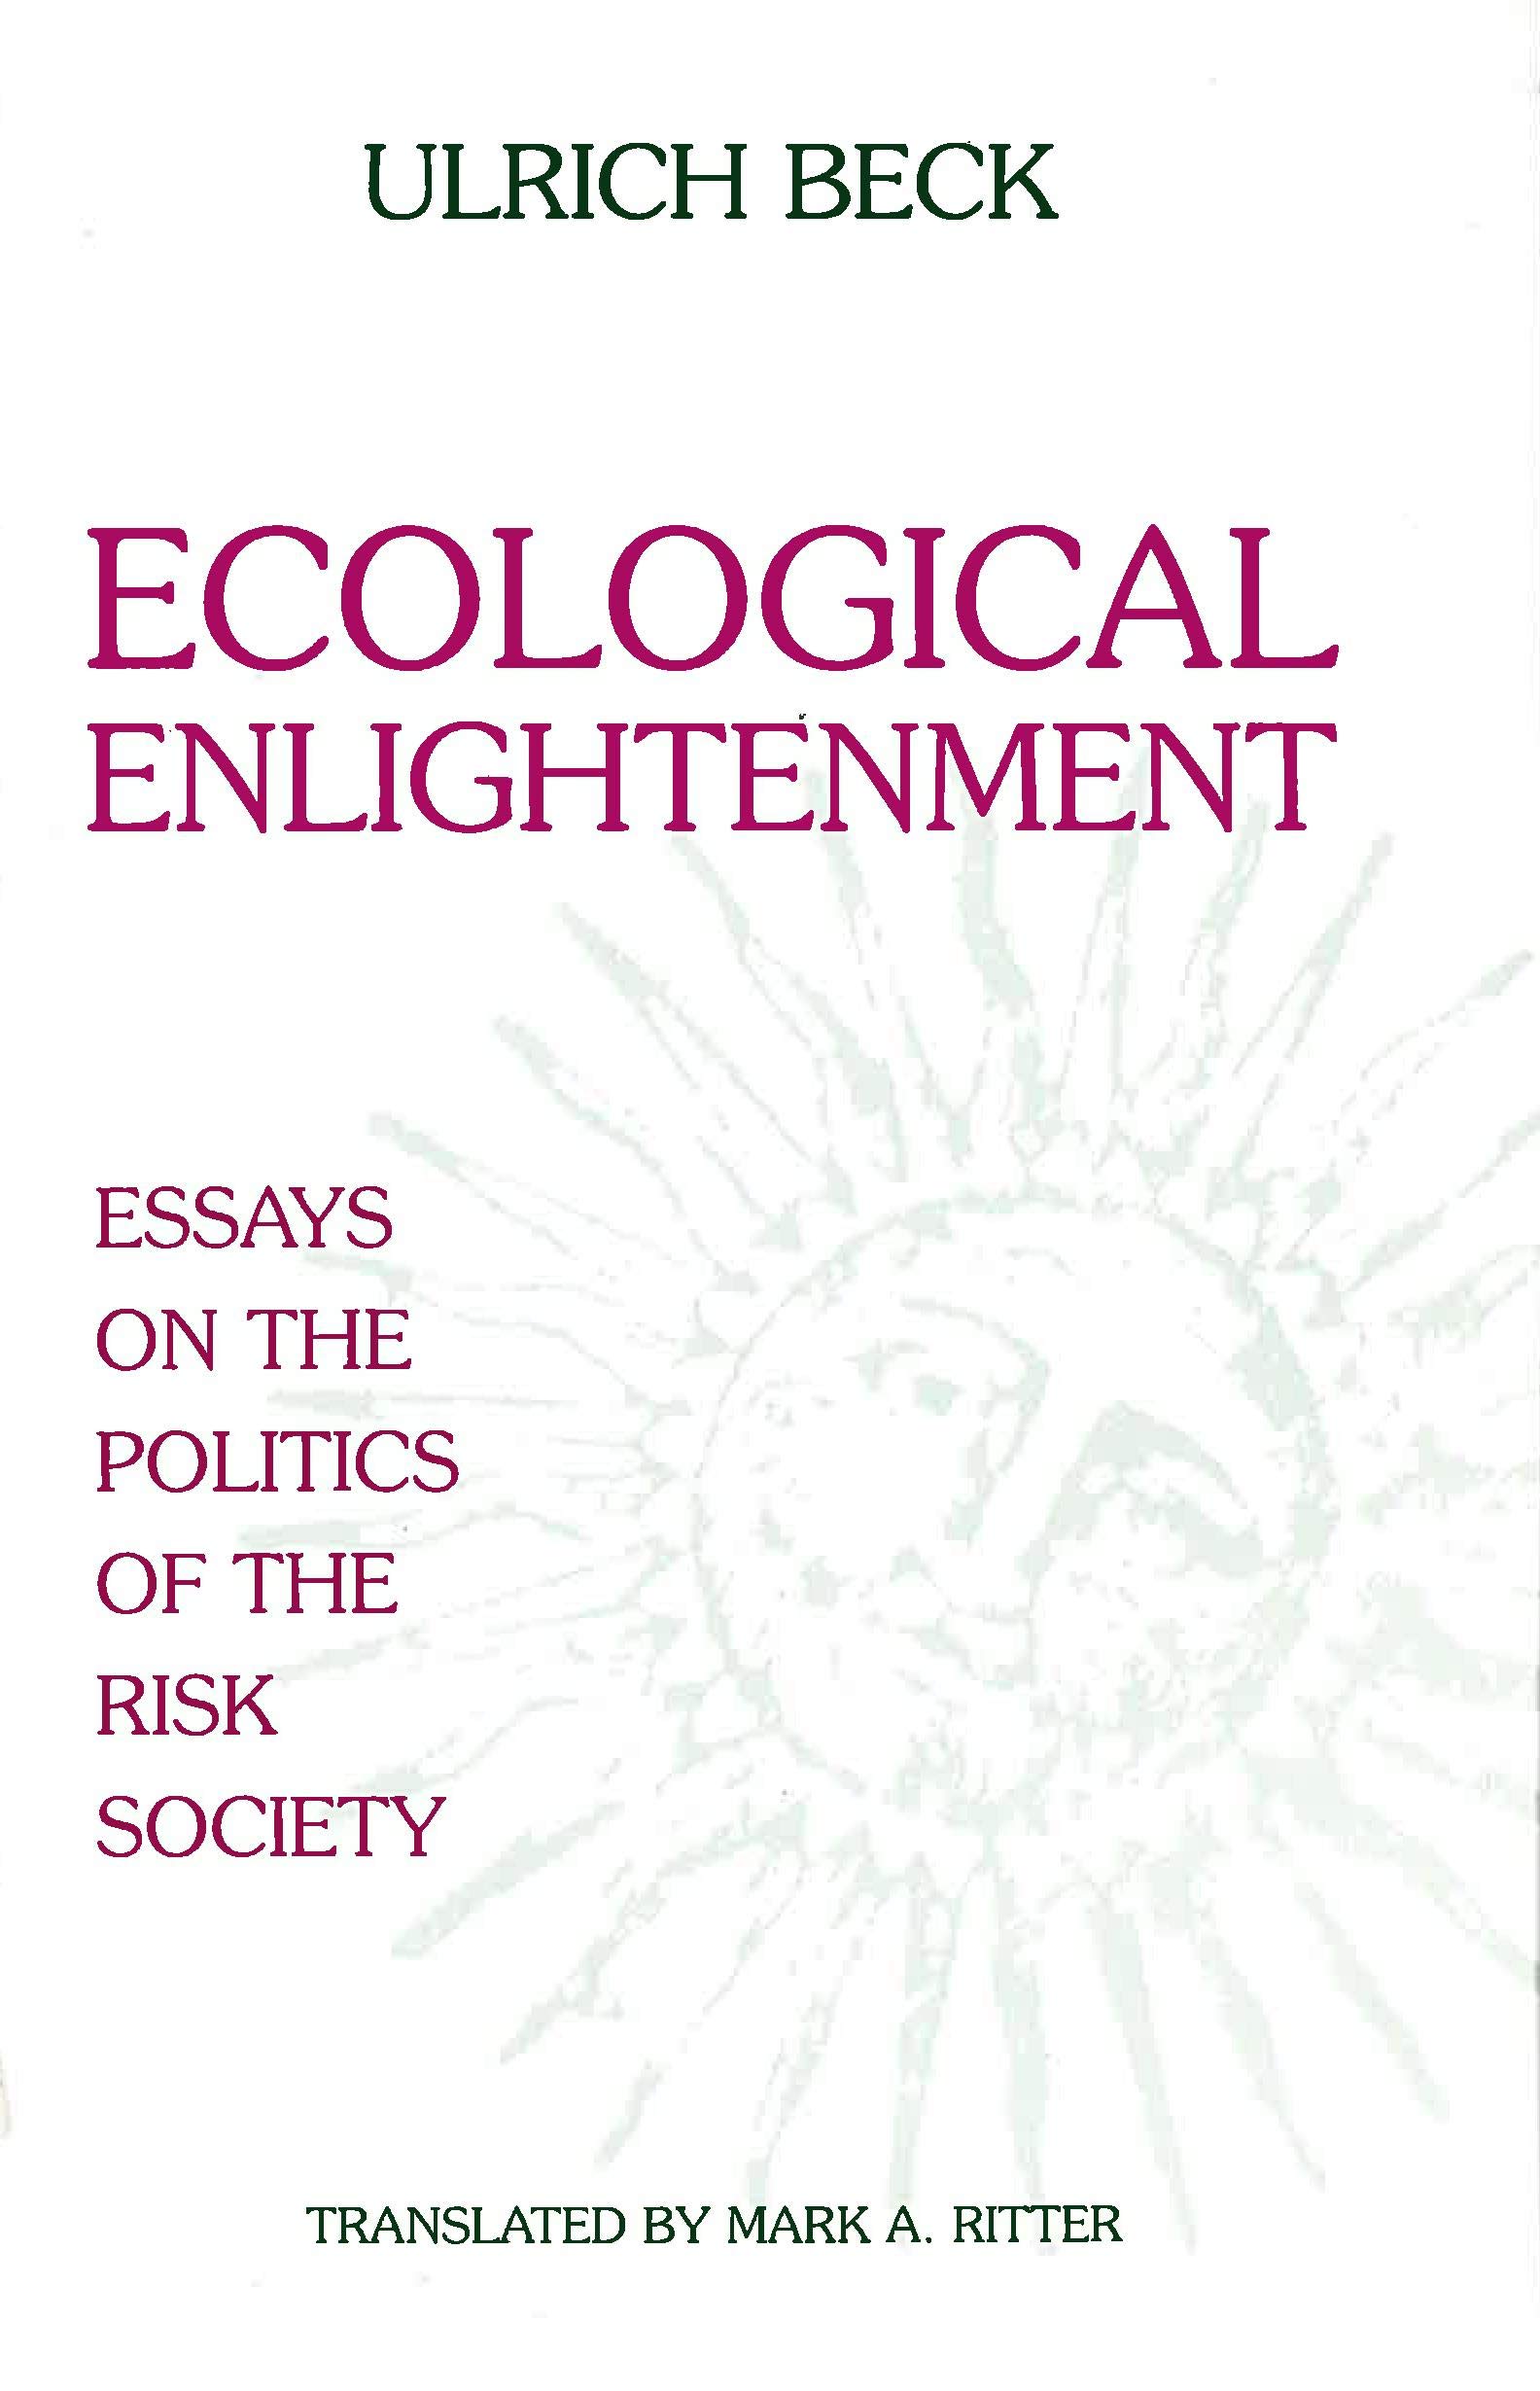 Ecological enlightenment